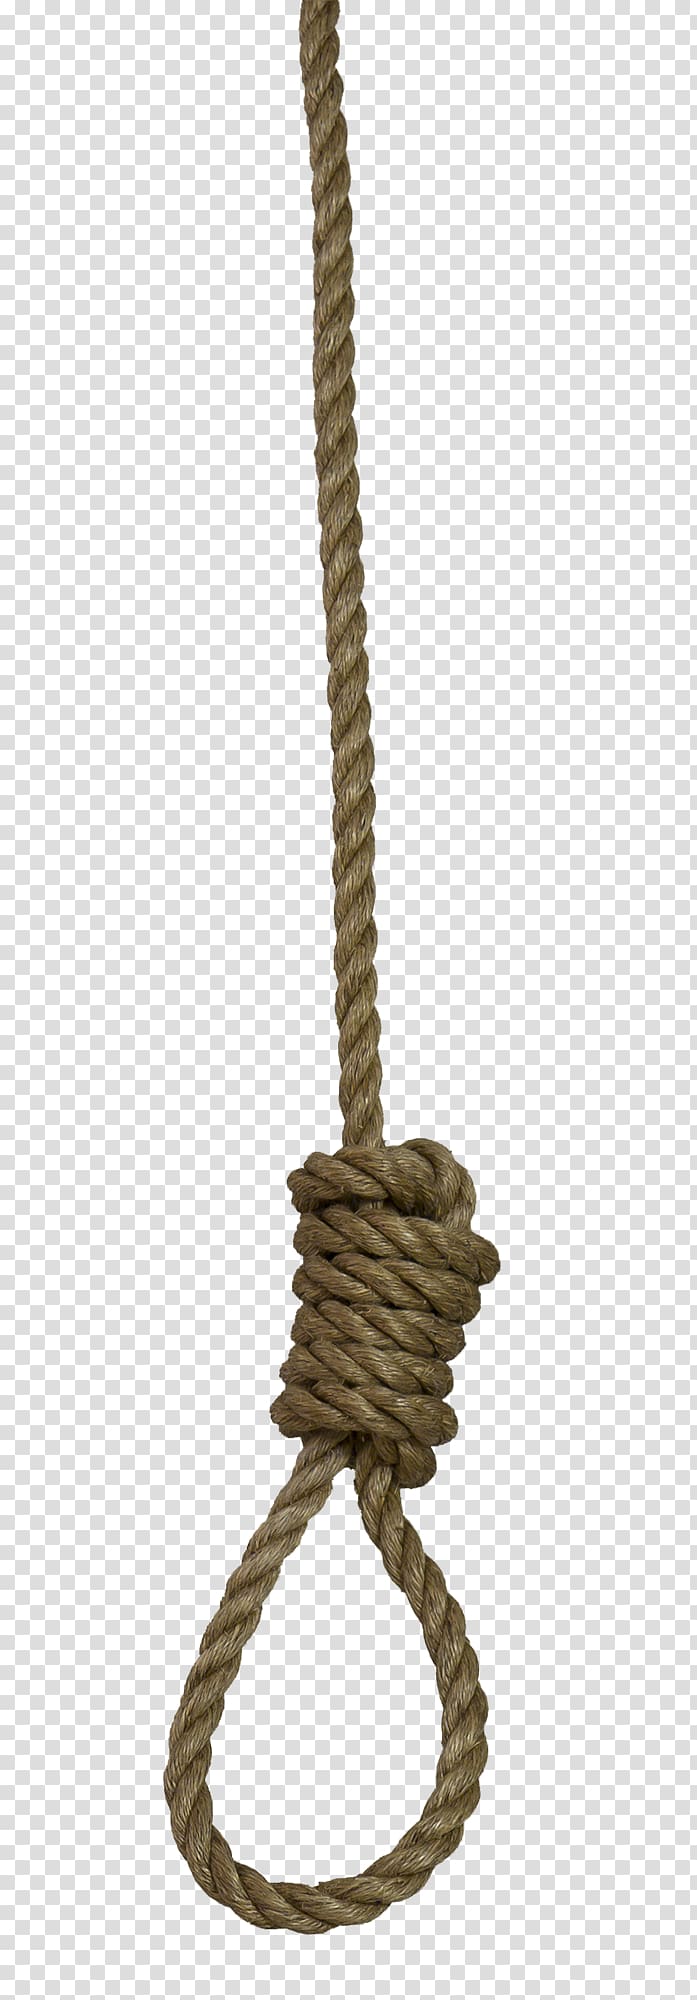 brown rope, Noose Rope Knot, A rope transparent background PNG clipart